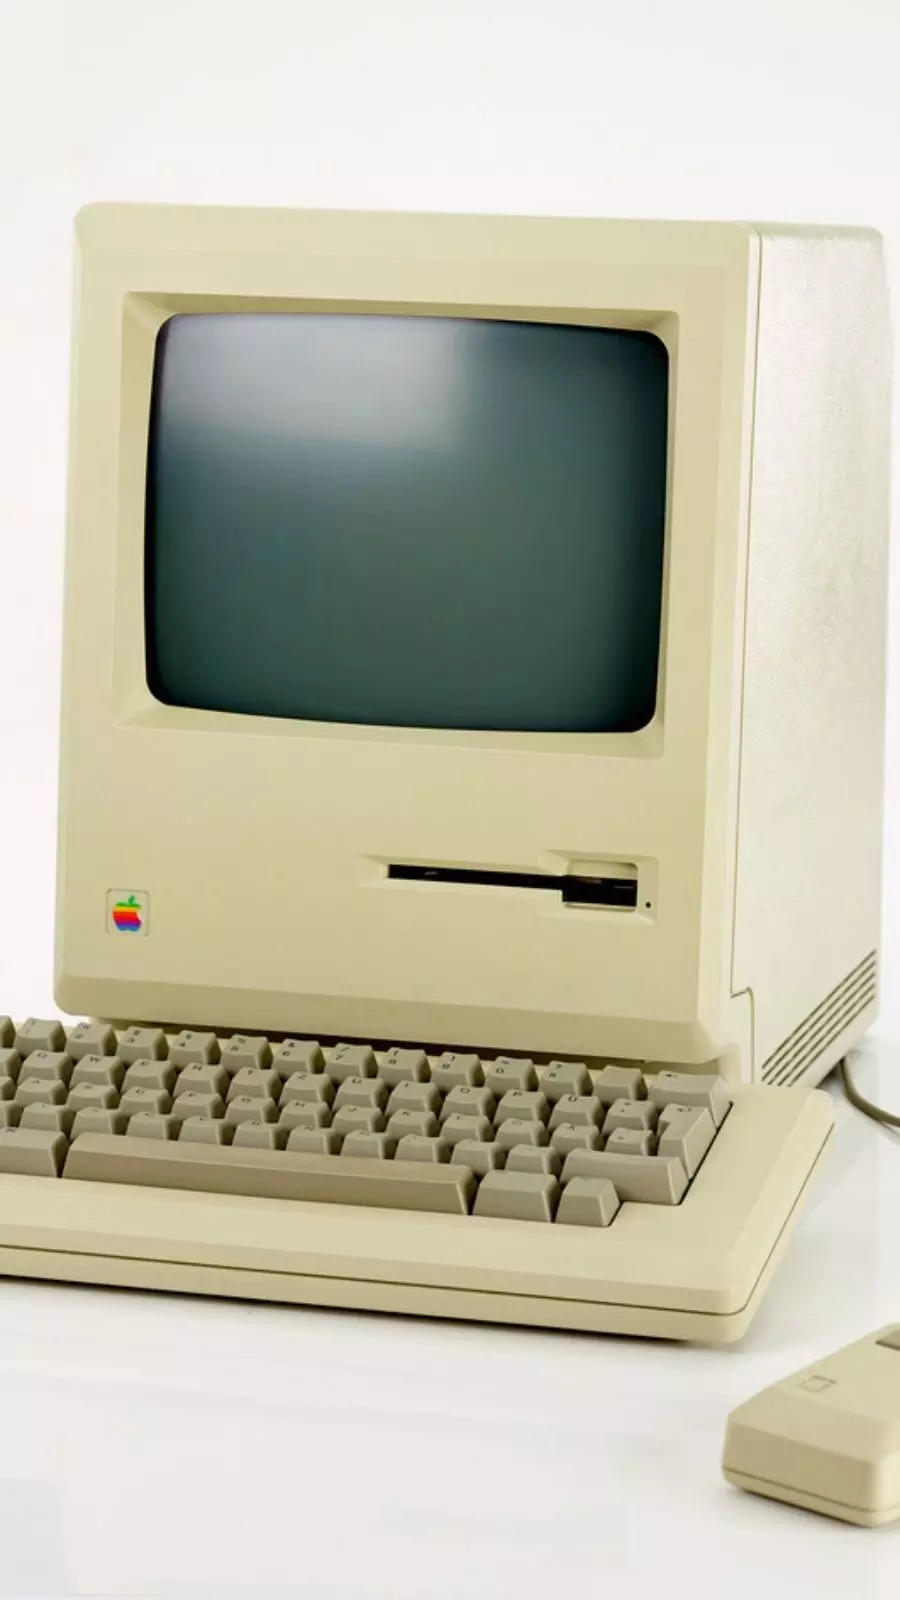 Apple: Macintosh: 38 Yrs And Counting, Apple's 1st PC Is An Icon